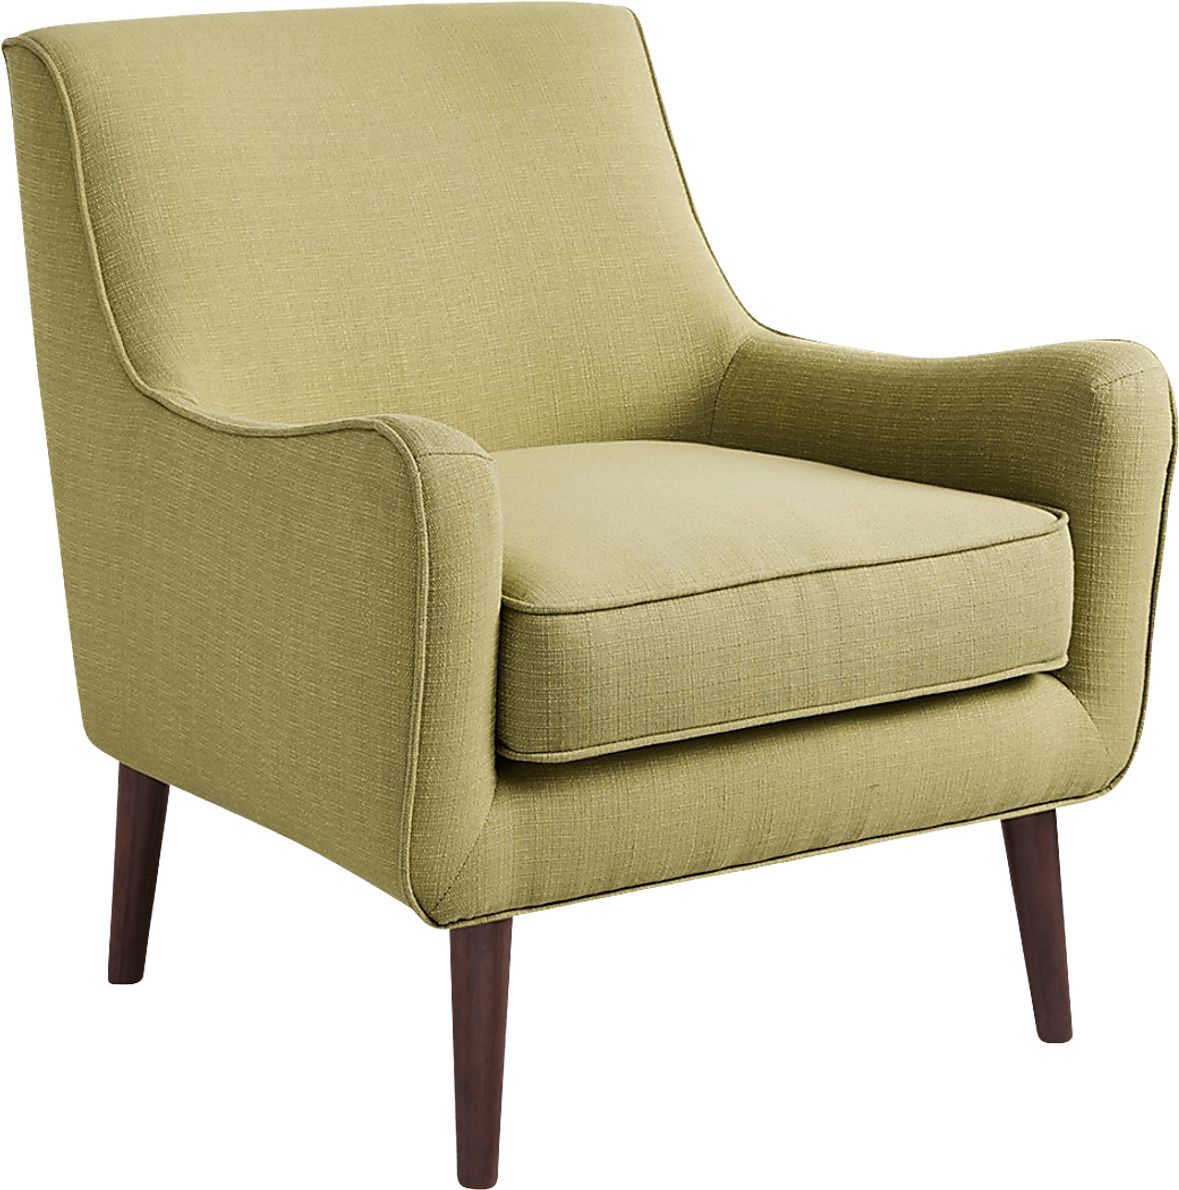 Frostwood Accent Chair